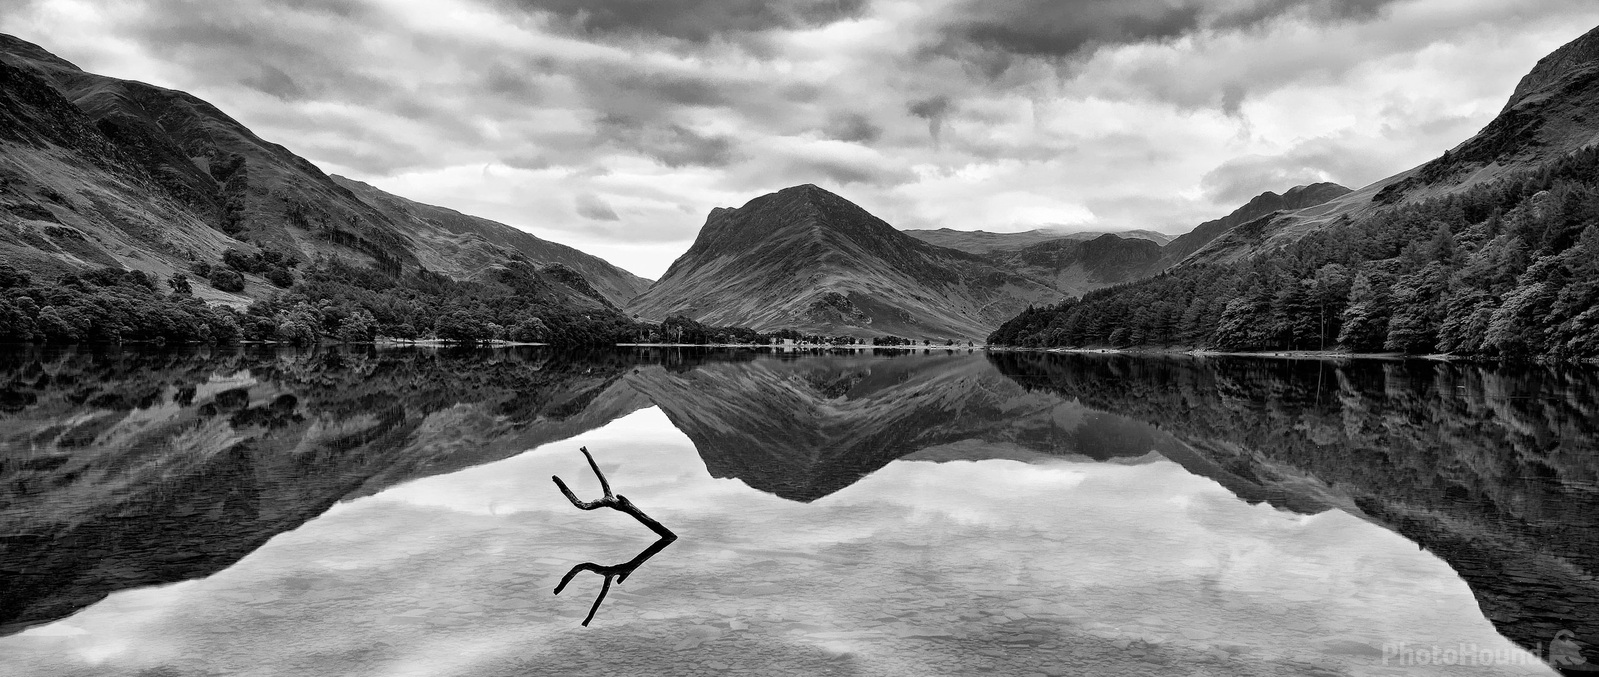 Image of Buttermere North Shoreline by Andreas Marjoram